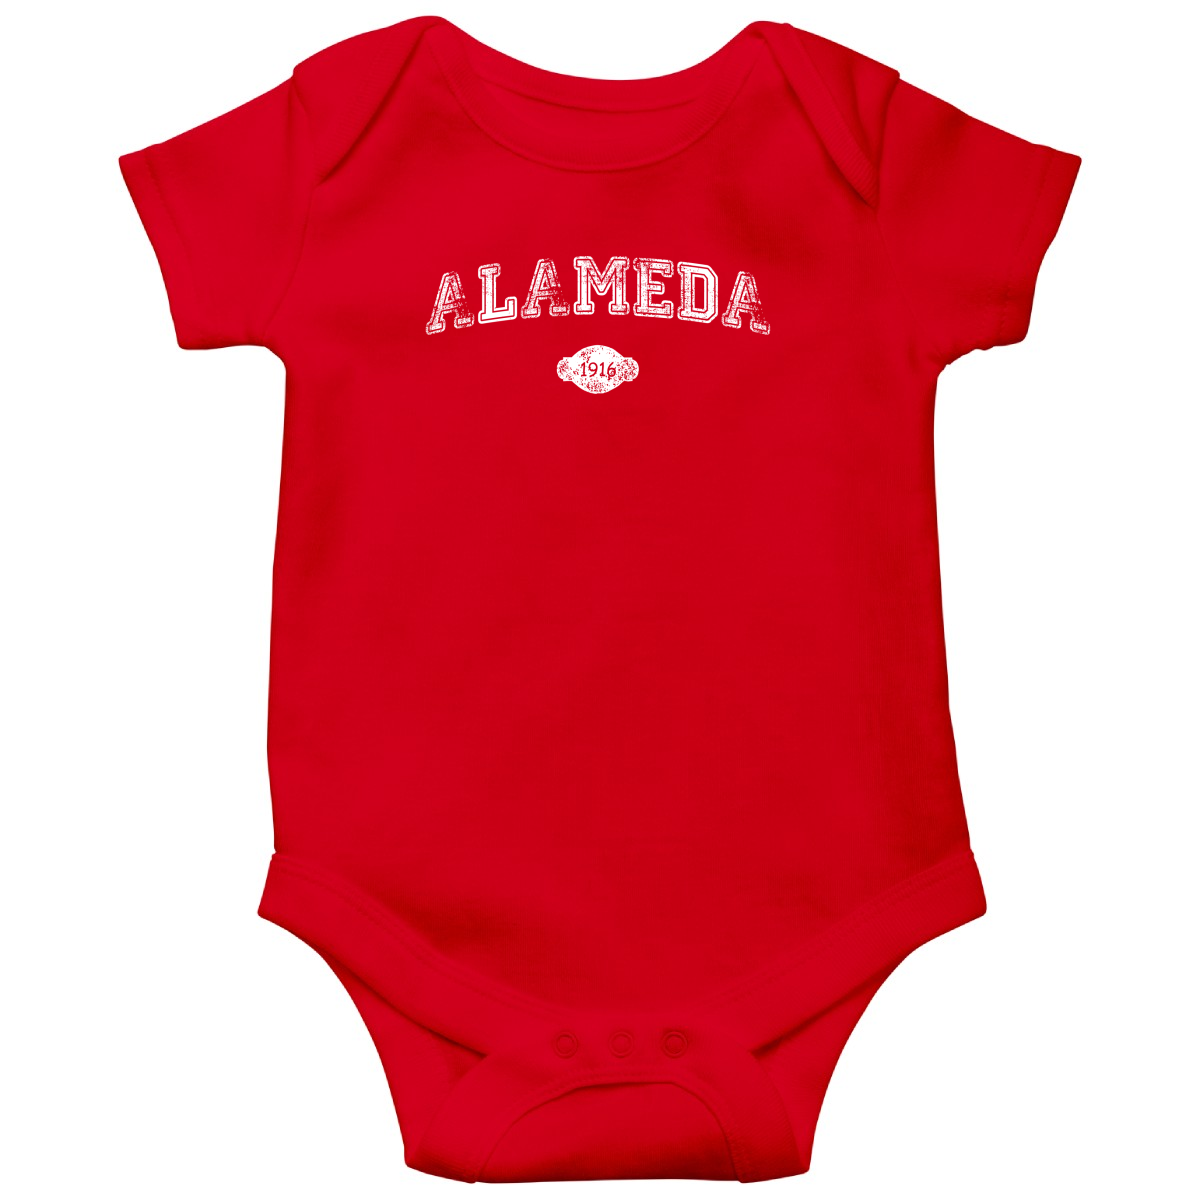 Alameda 1916 Baby Bodysuits | Red